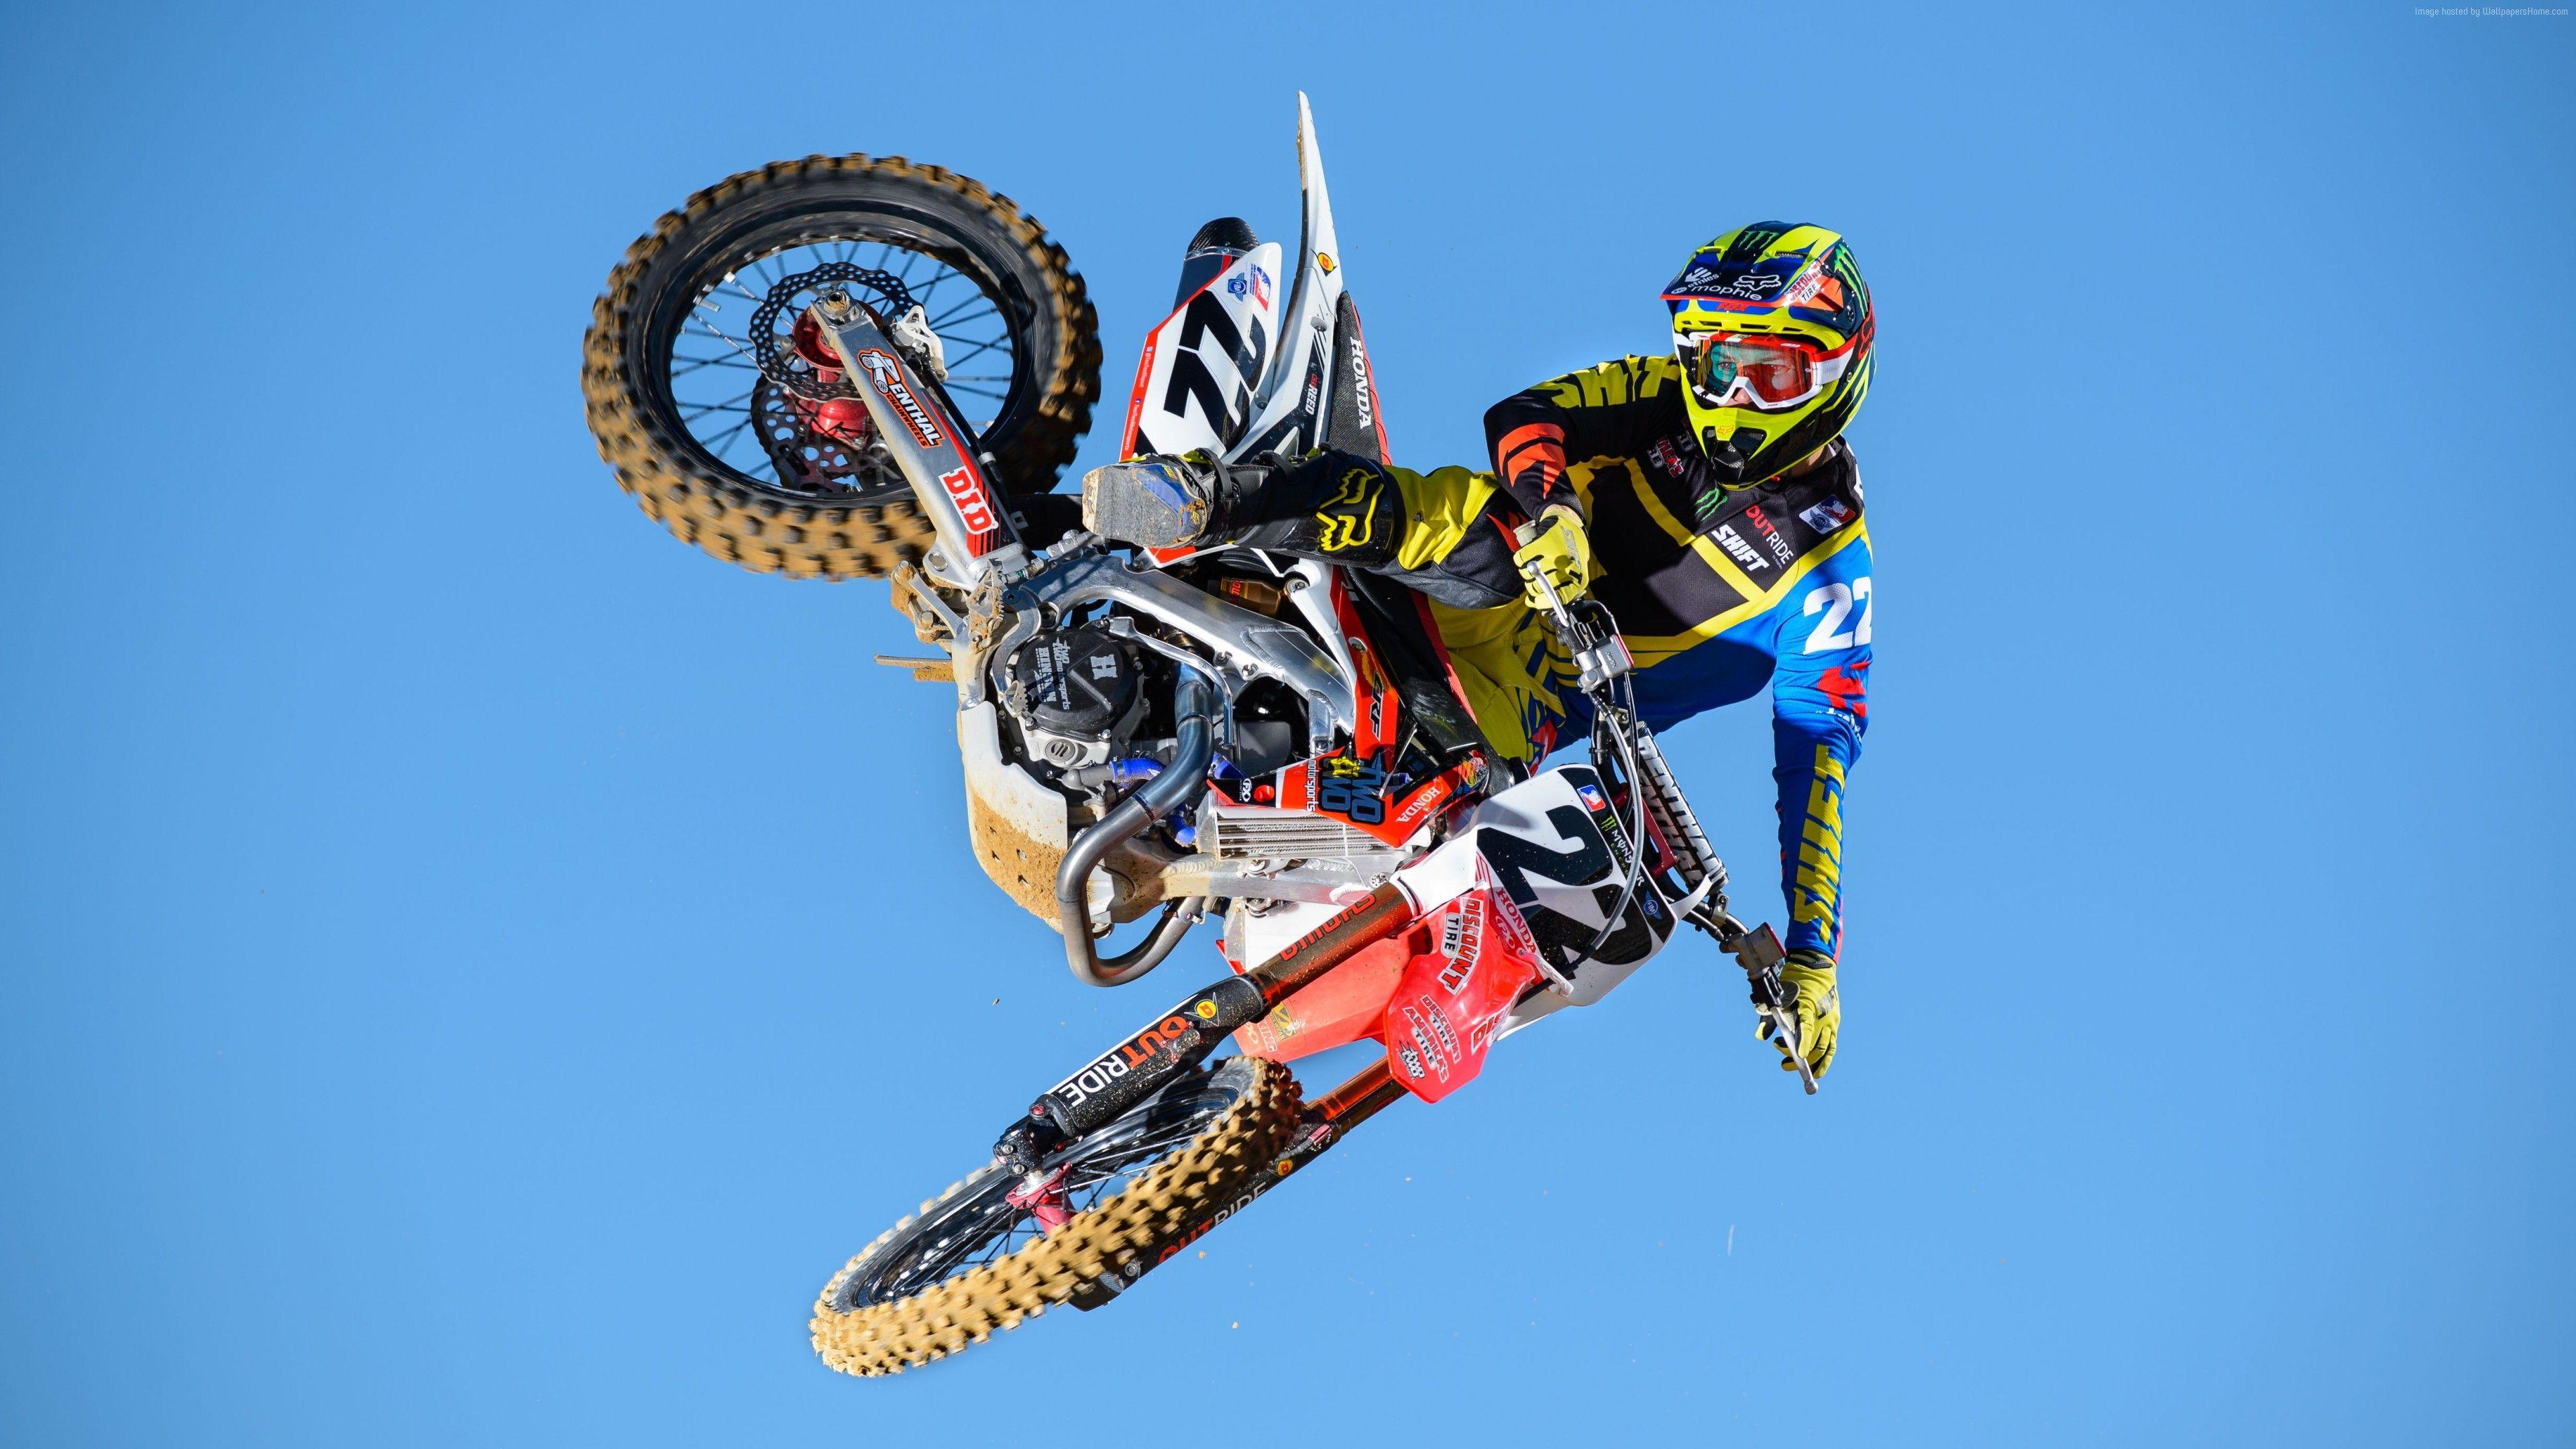 Freestyle Motocross Wallpapers Top Free Freestyle Motocross Backgrounds Wallpaperaccess